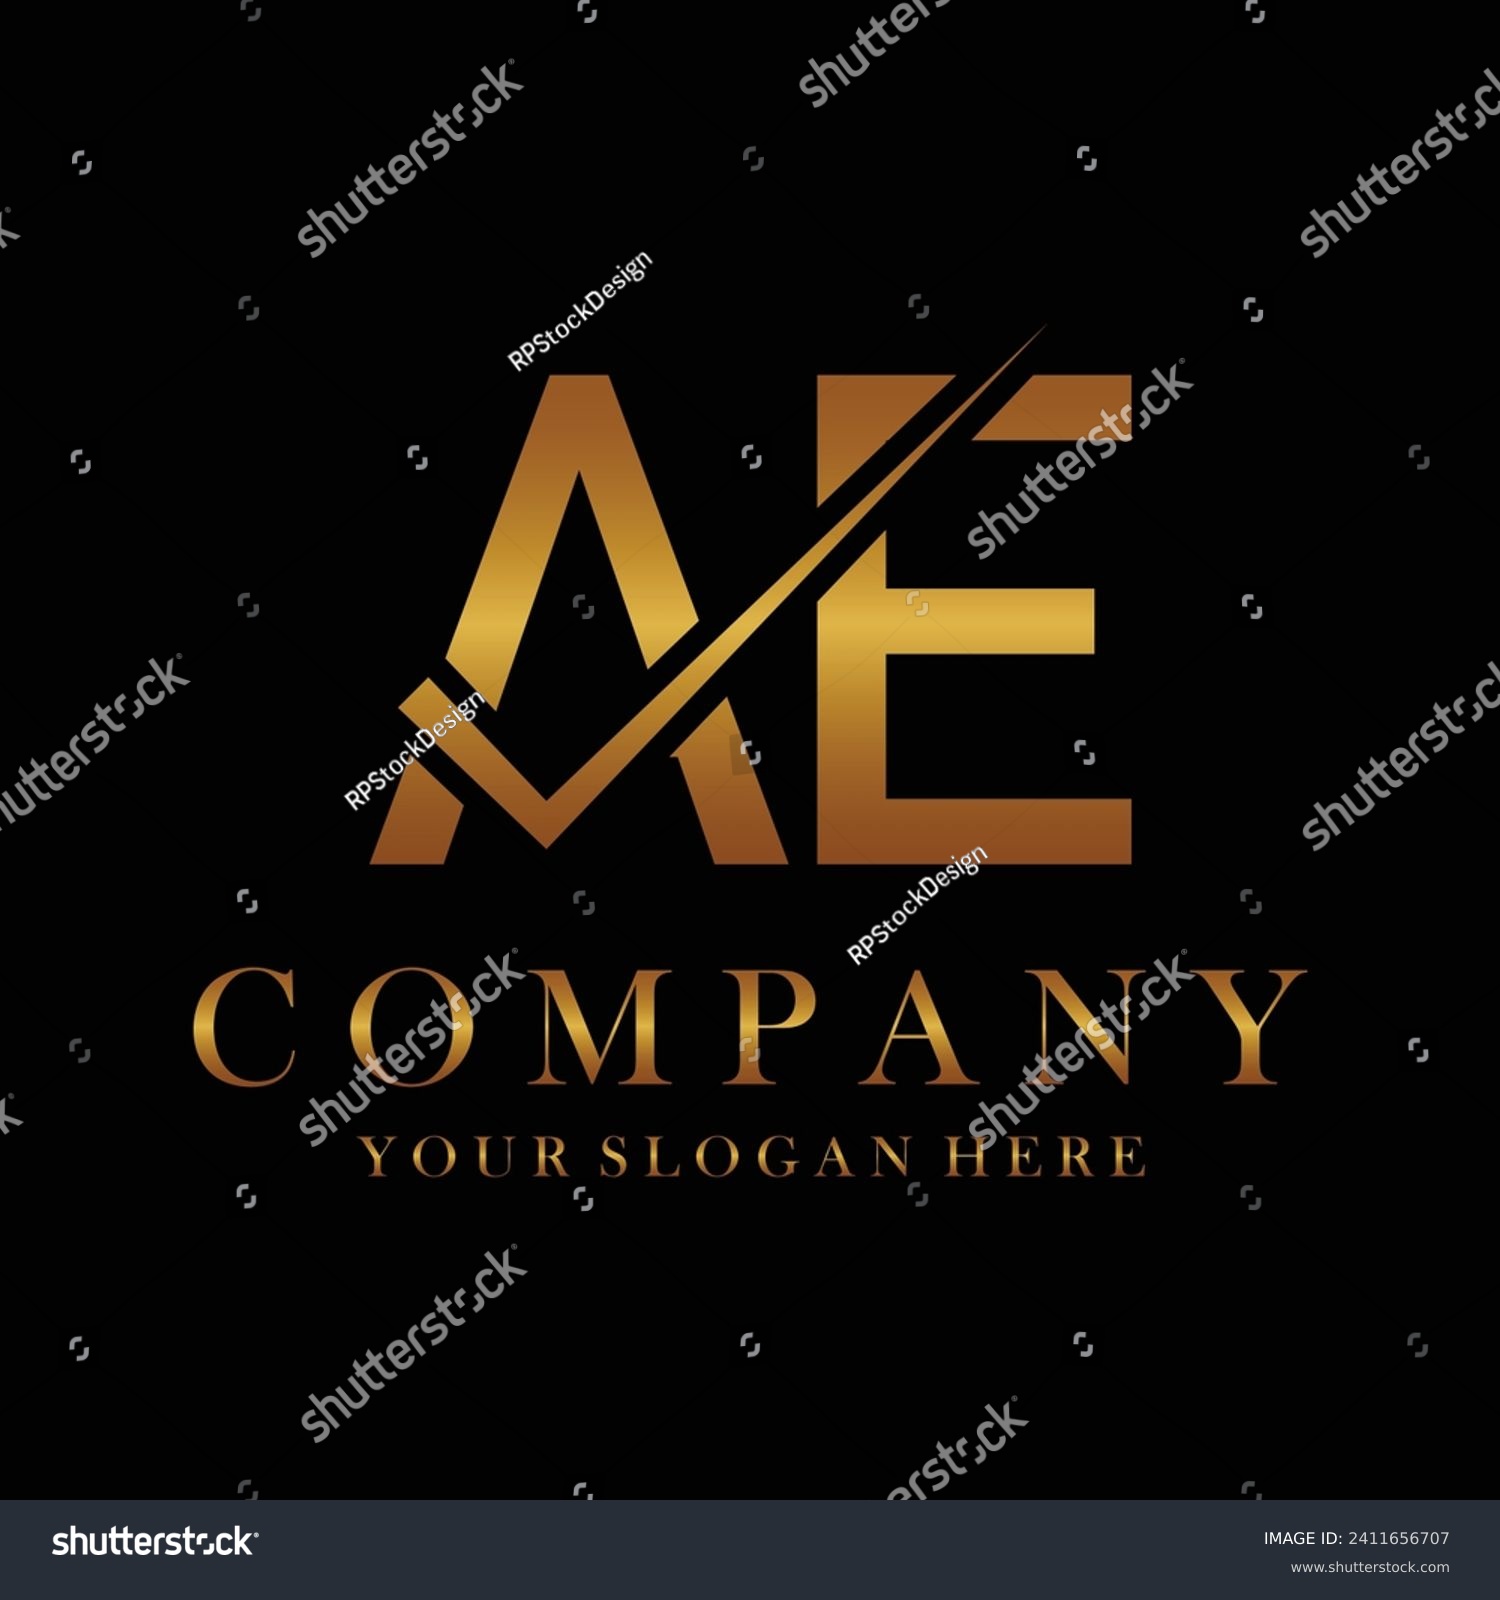 SVG of AE Letter Logo Design Template Vector. Creative initials letter AE logo concept. svg